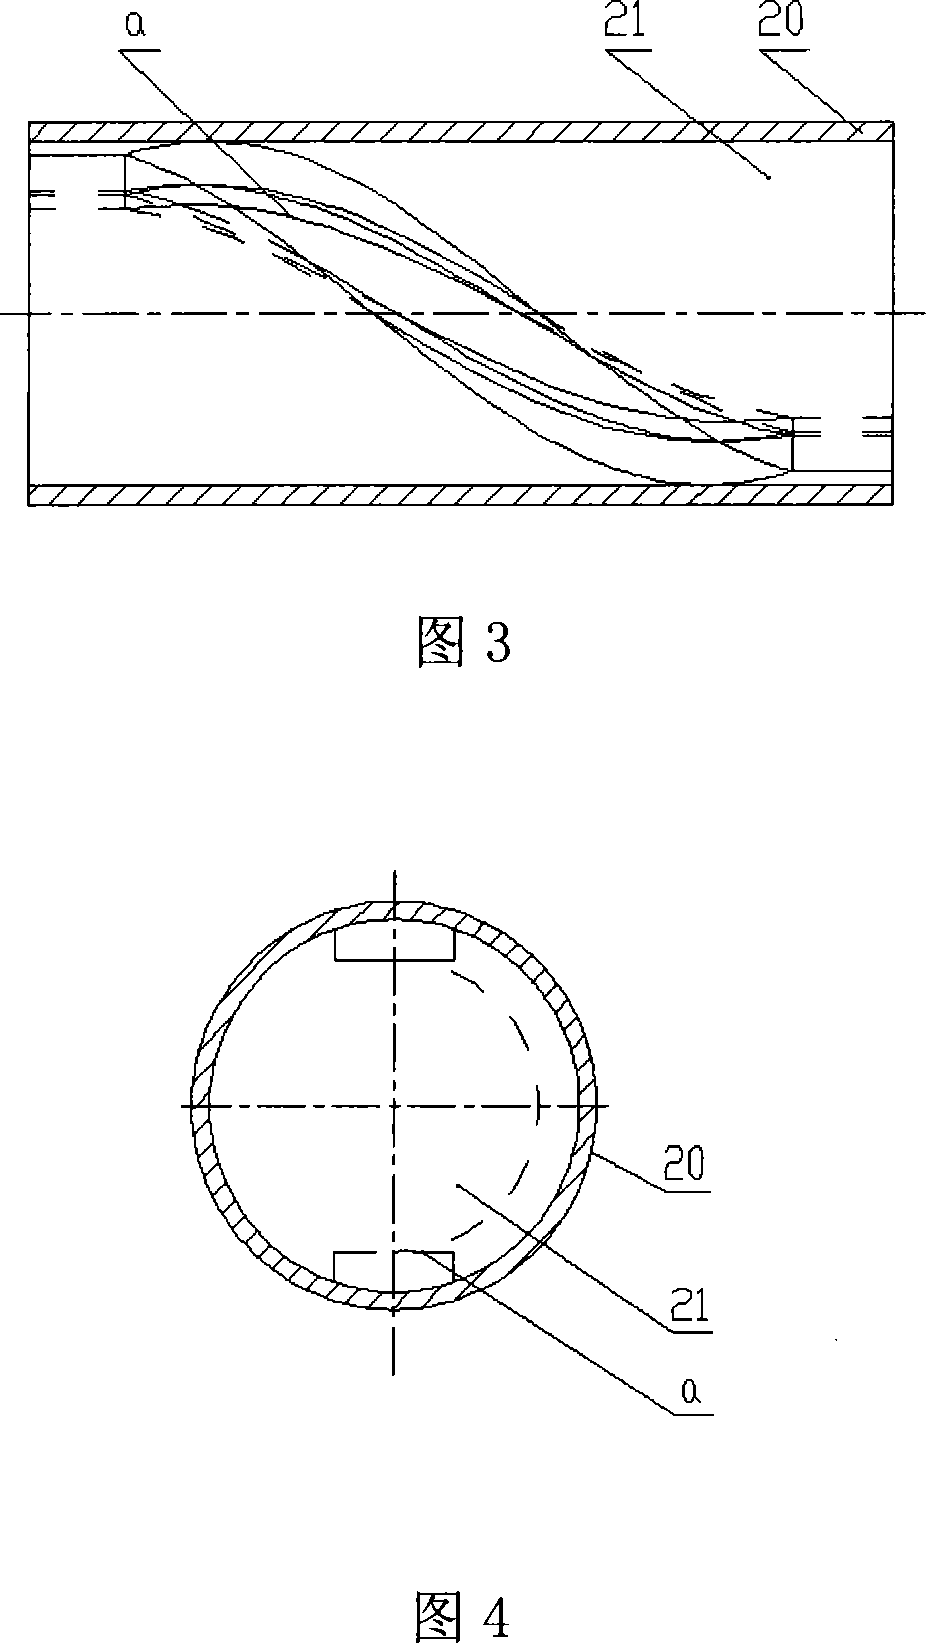 Small-sized bearing continuous roll-over spraying cleaning device